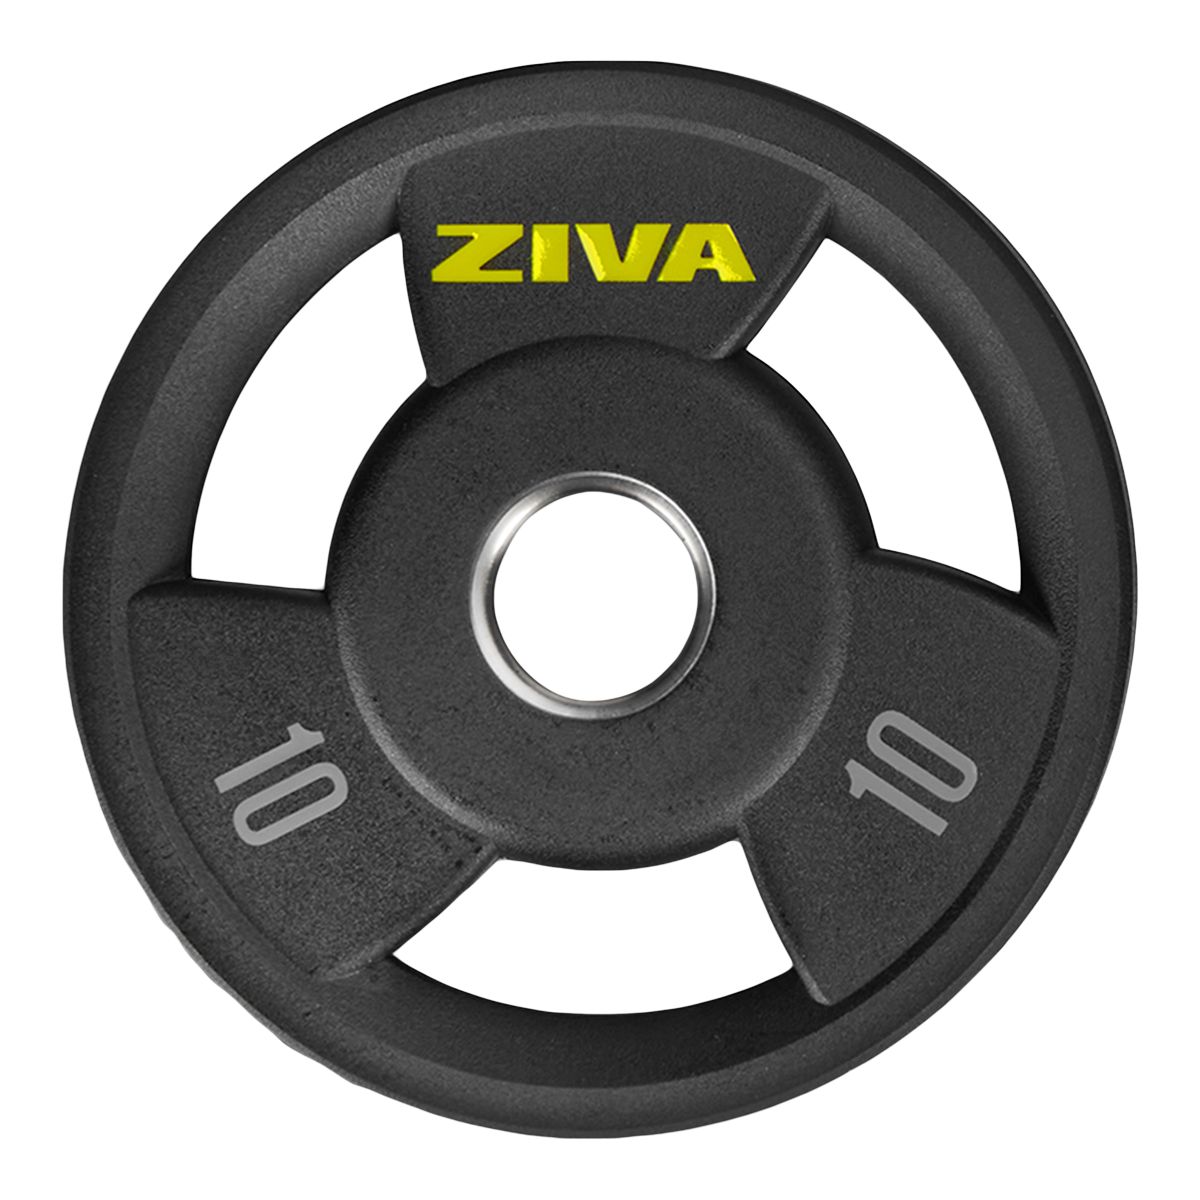 Image of Ziva Performance Rubber Grip 10 lb Weight Disc Weight Home Gym